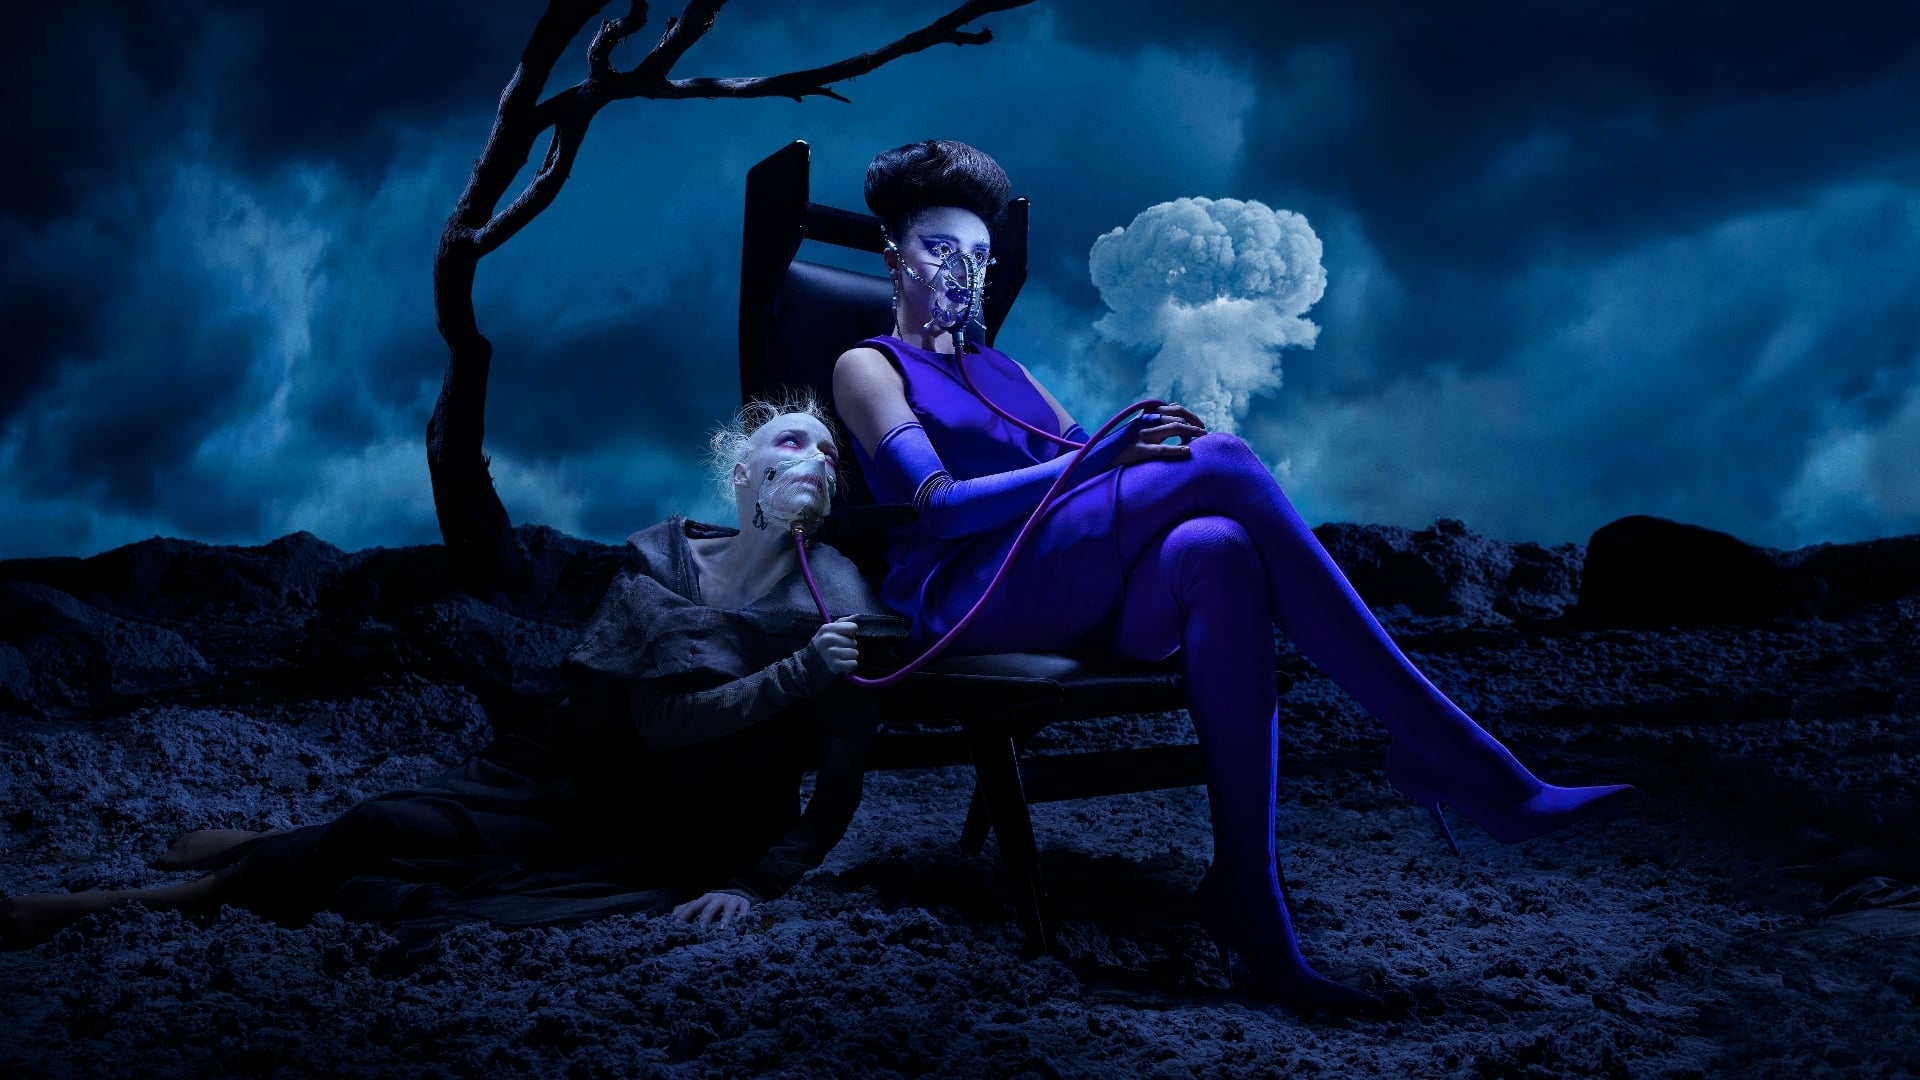 A woman in a purple dress sits on a chair in a dark, rocky landscape. A man kneels at her feet, his face obscured by a mask. - Horror